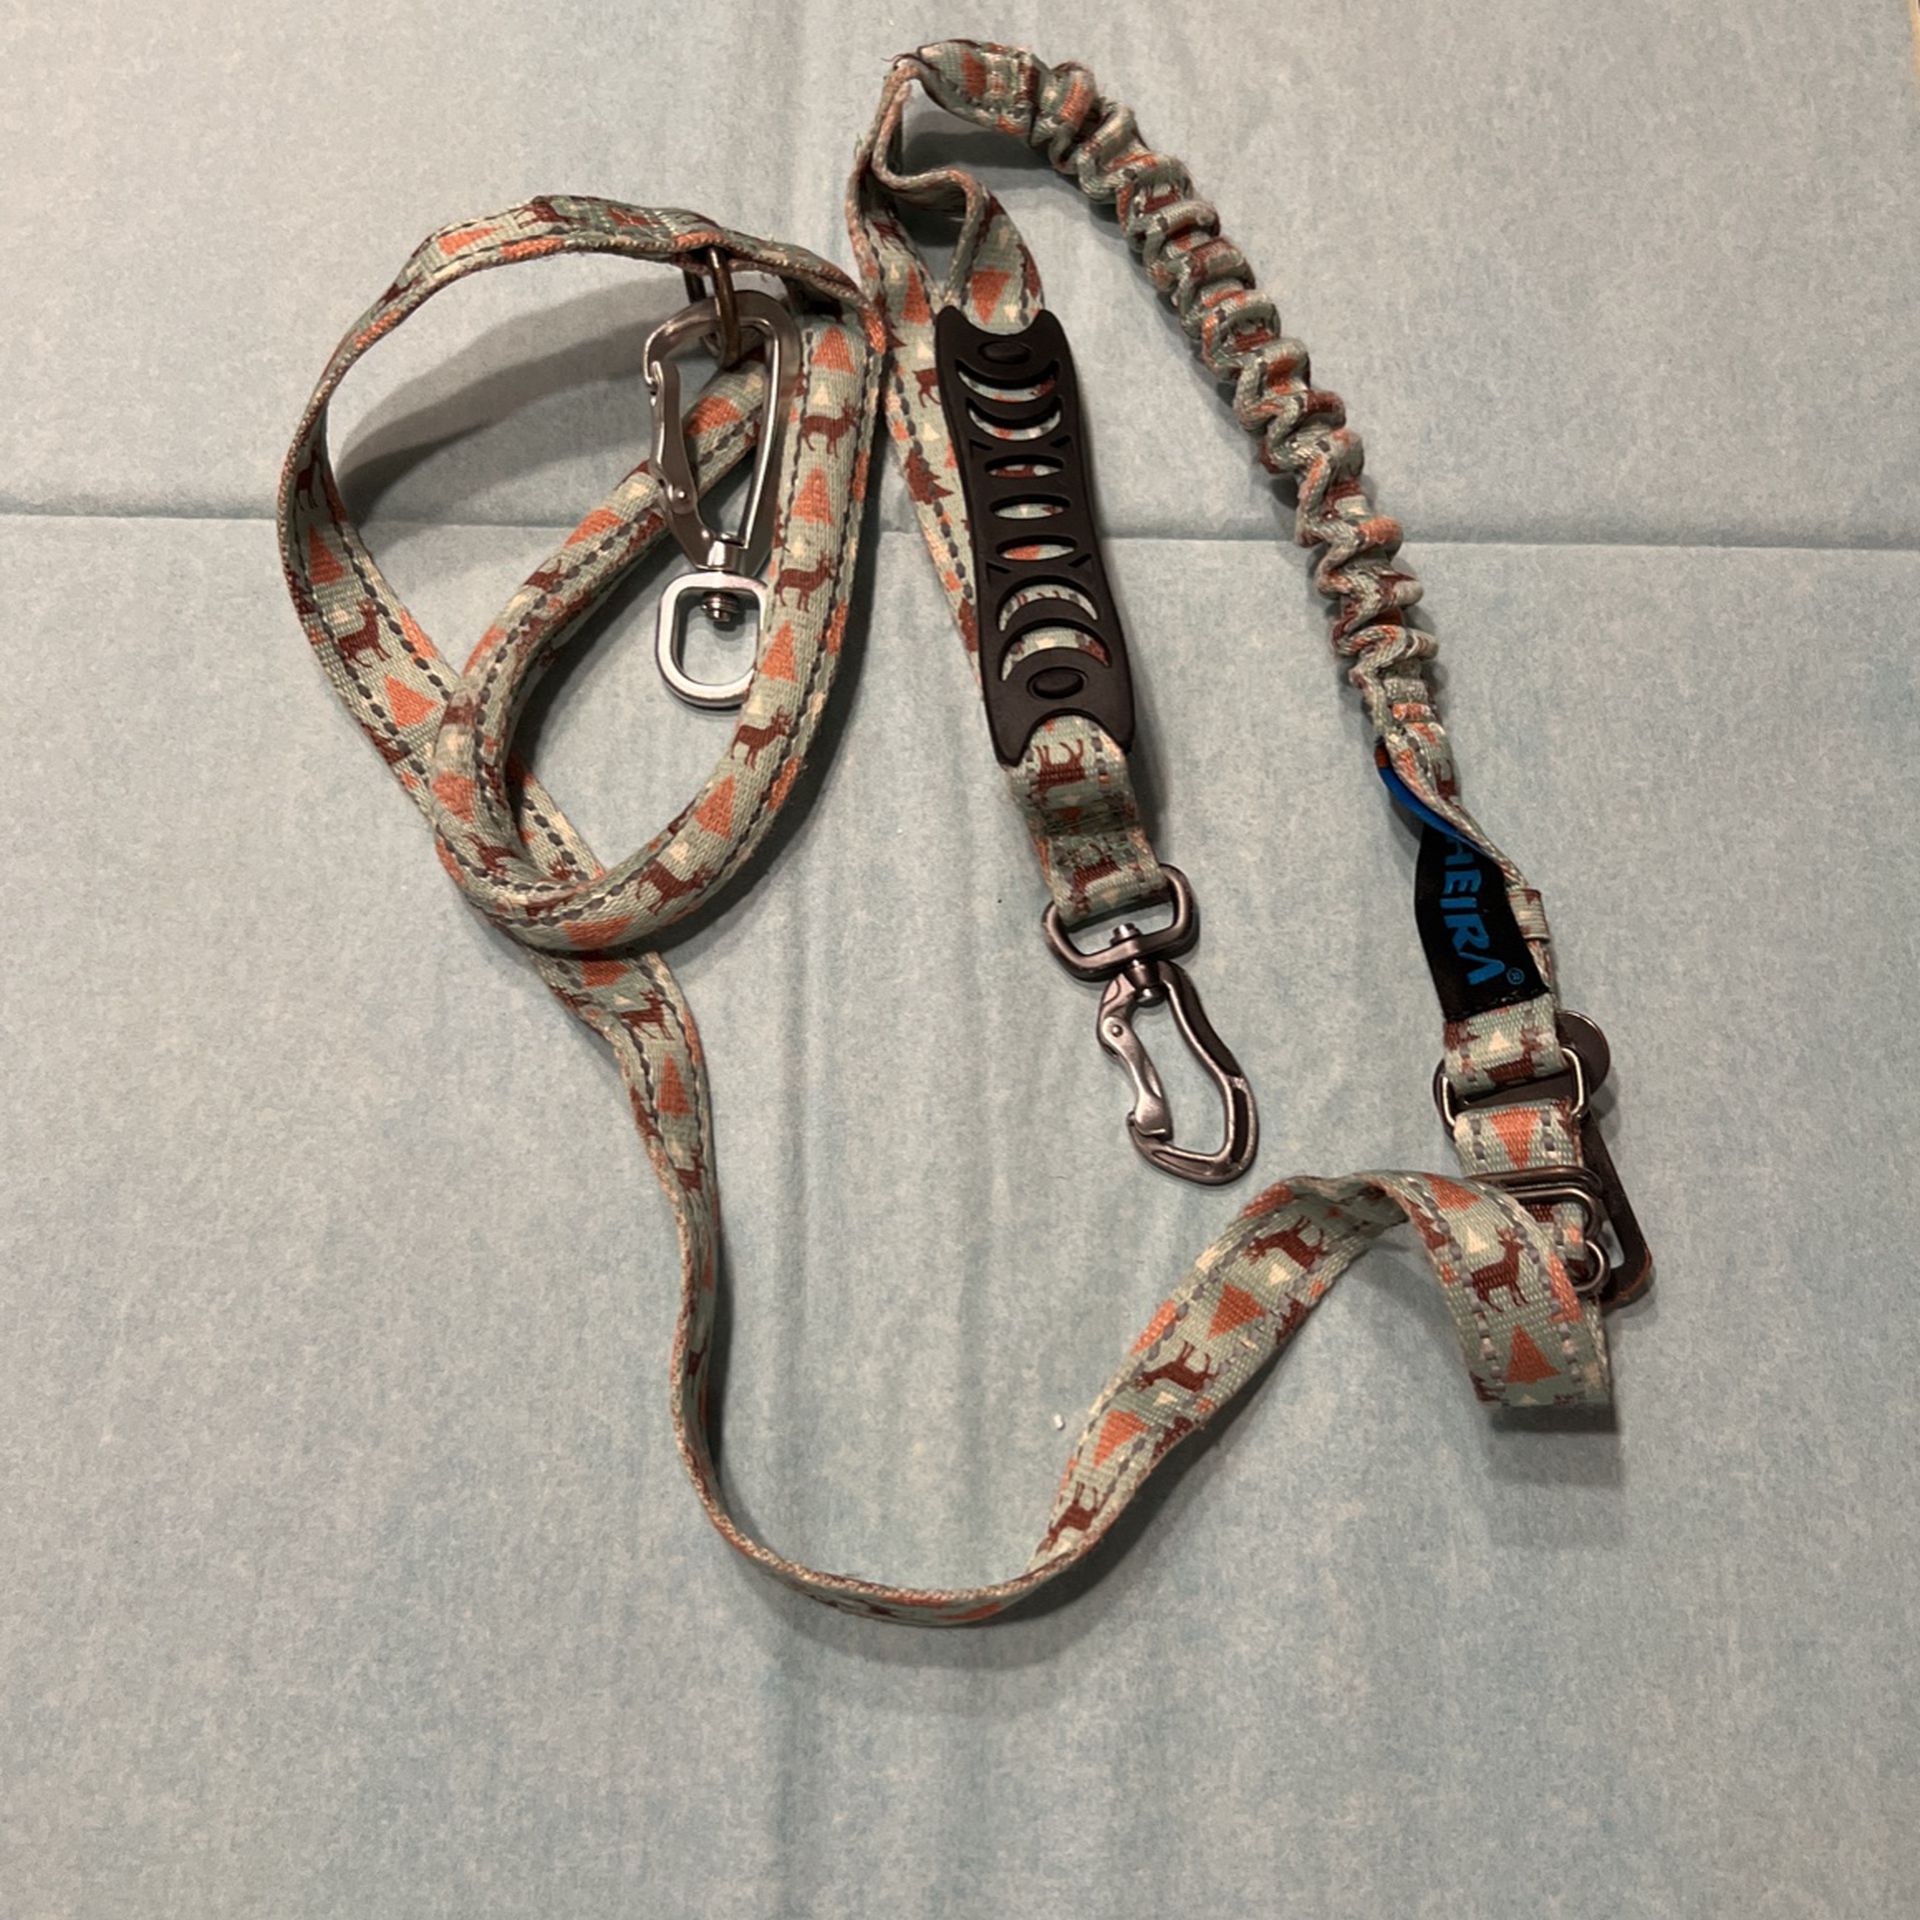 Dog Leash With Carabiner, Extra Carabiner And Car Belt Buckle